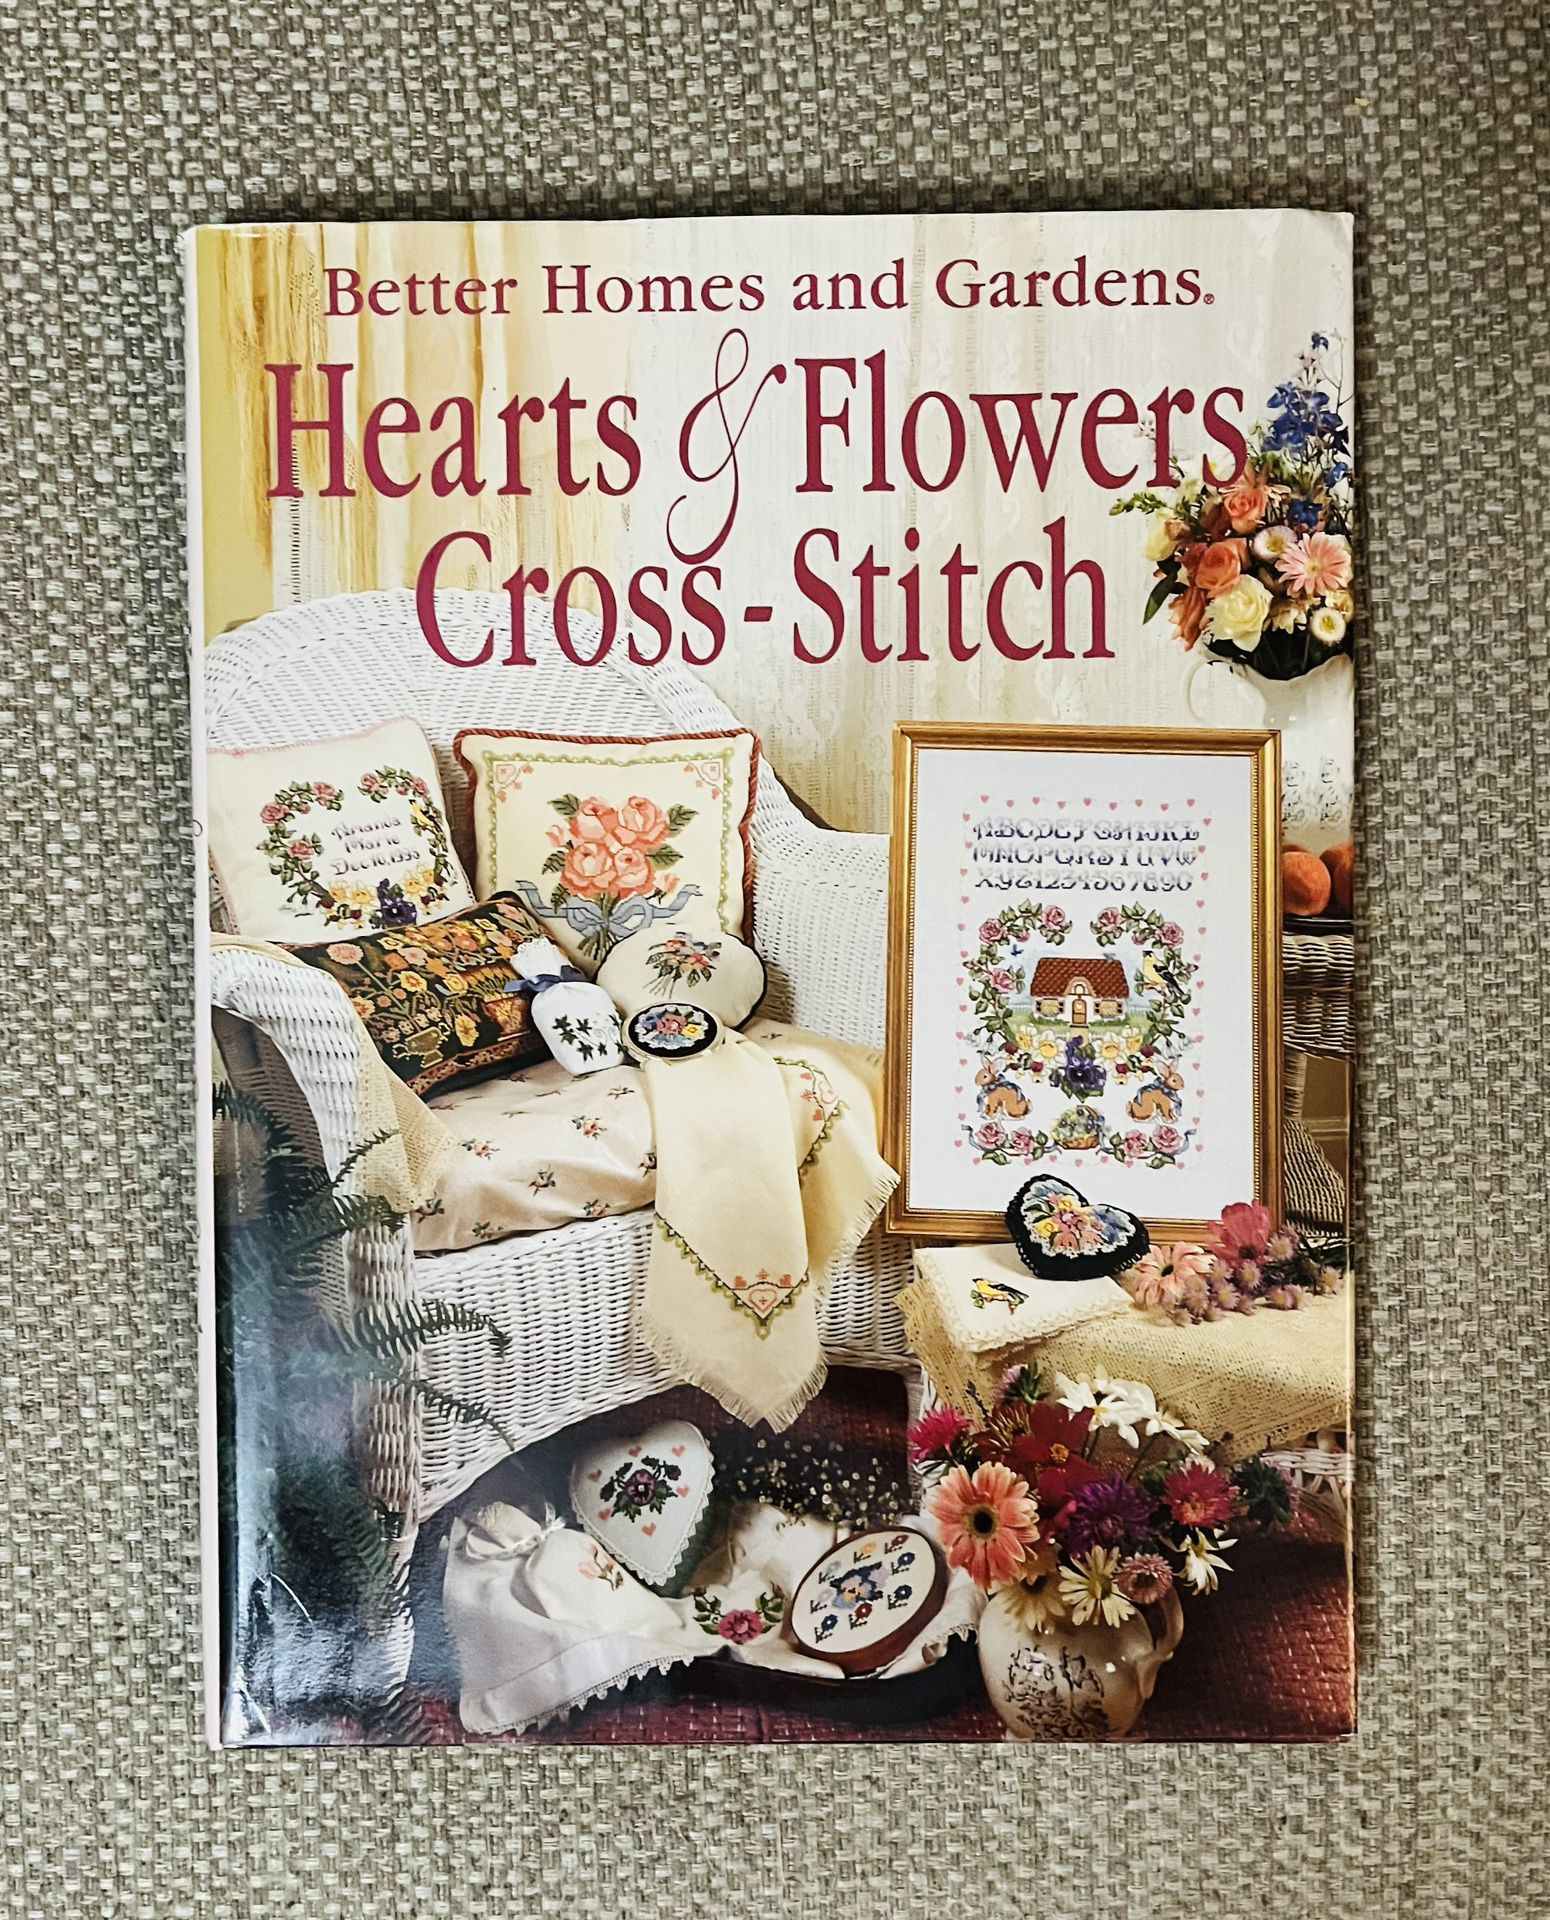 Hearts & Flowers Cross-Stitch Hard Cover Book